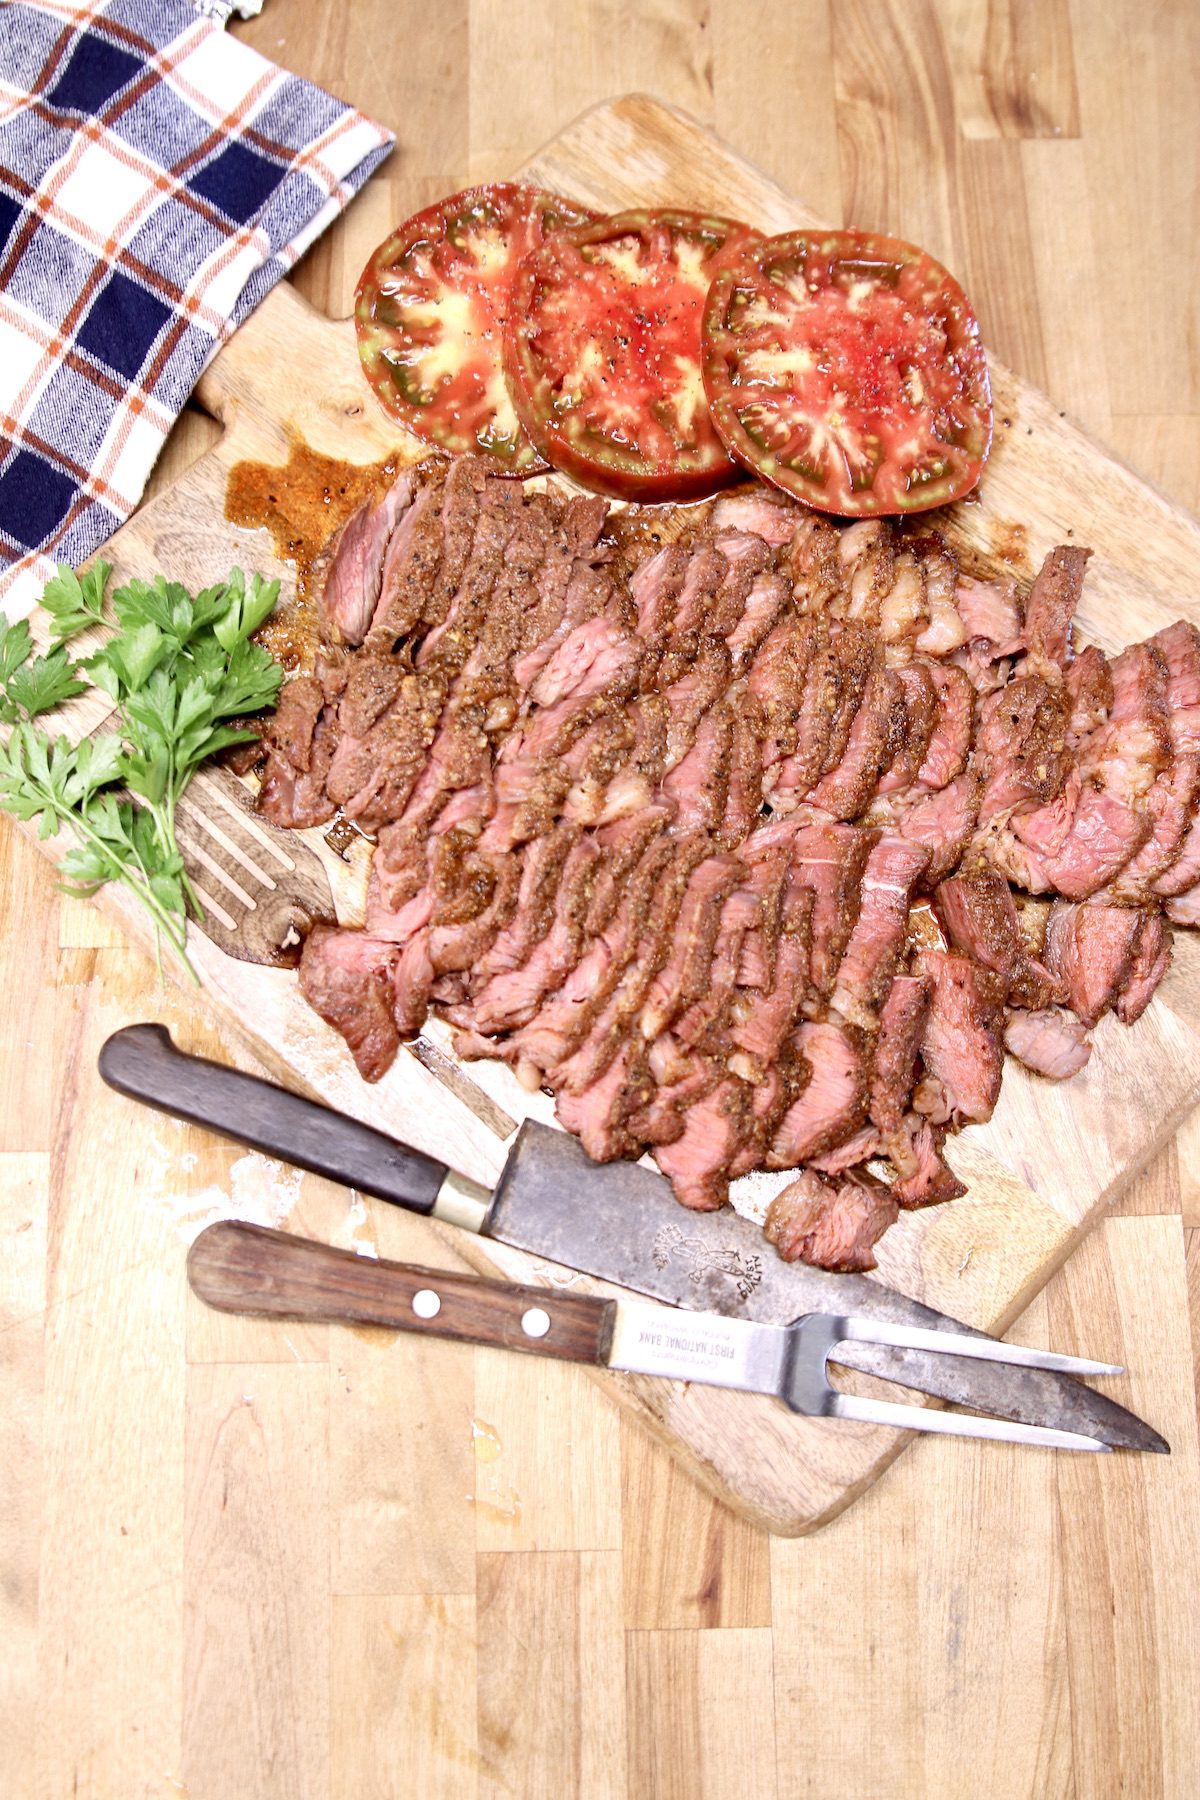 overhead view of cutting board of sliced beef roast and sliced tomatoes